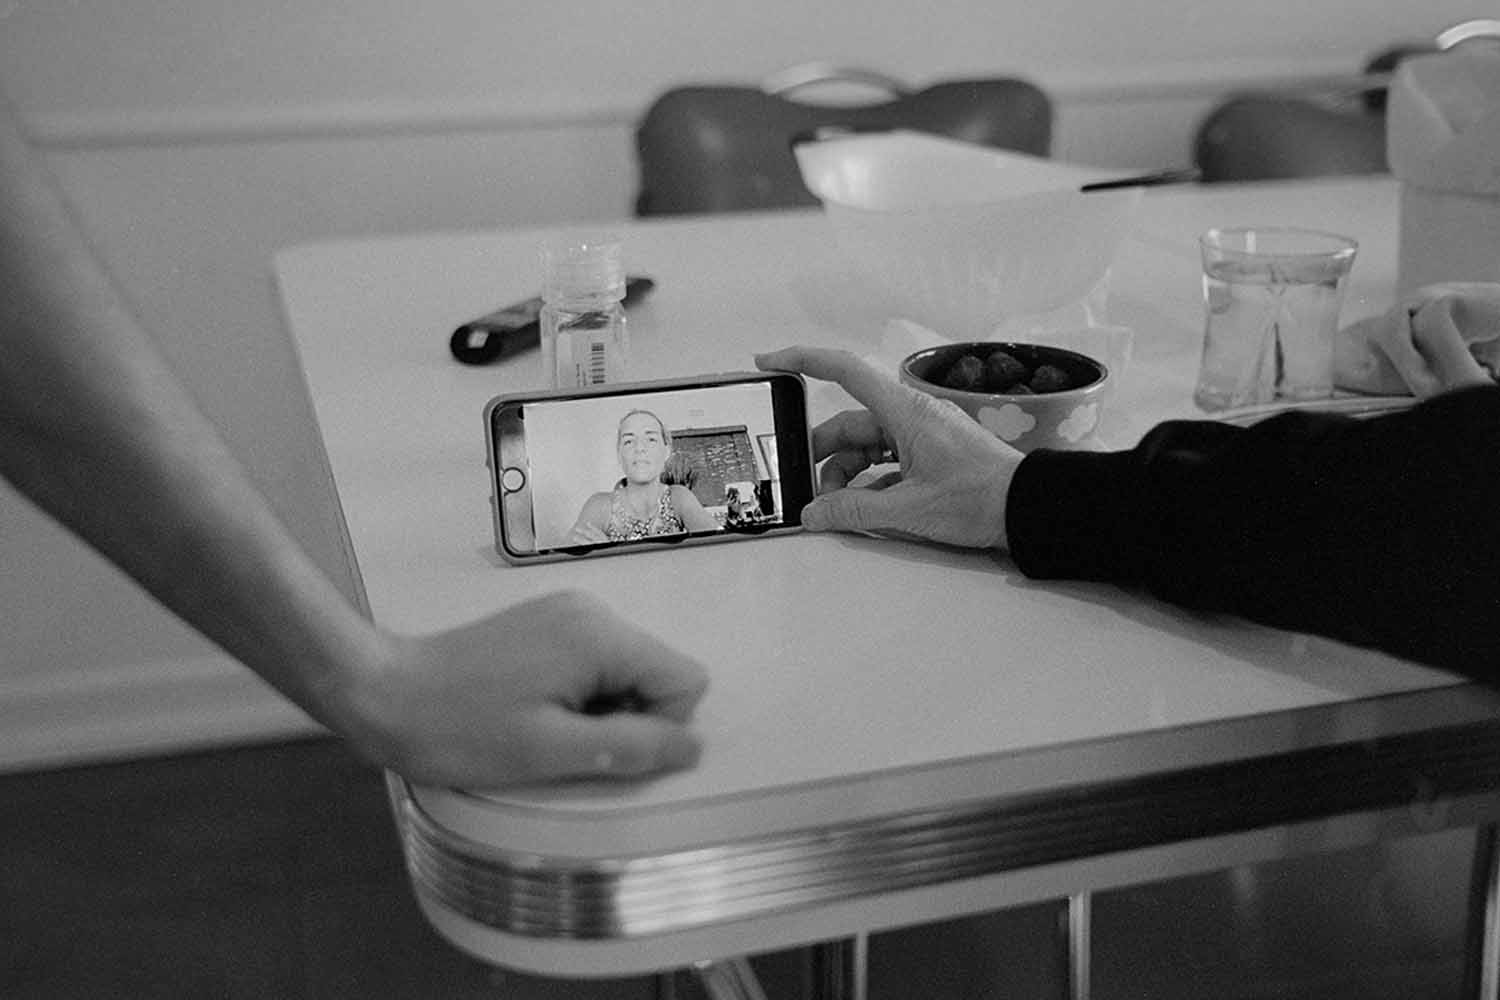 phone on table